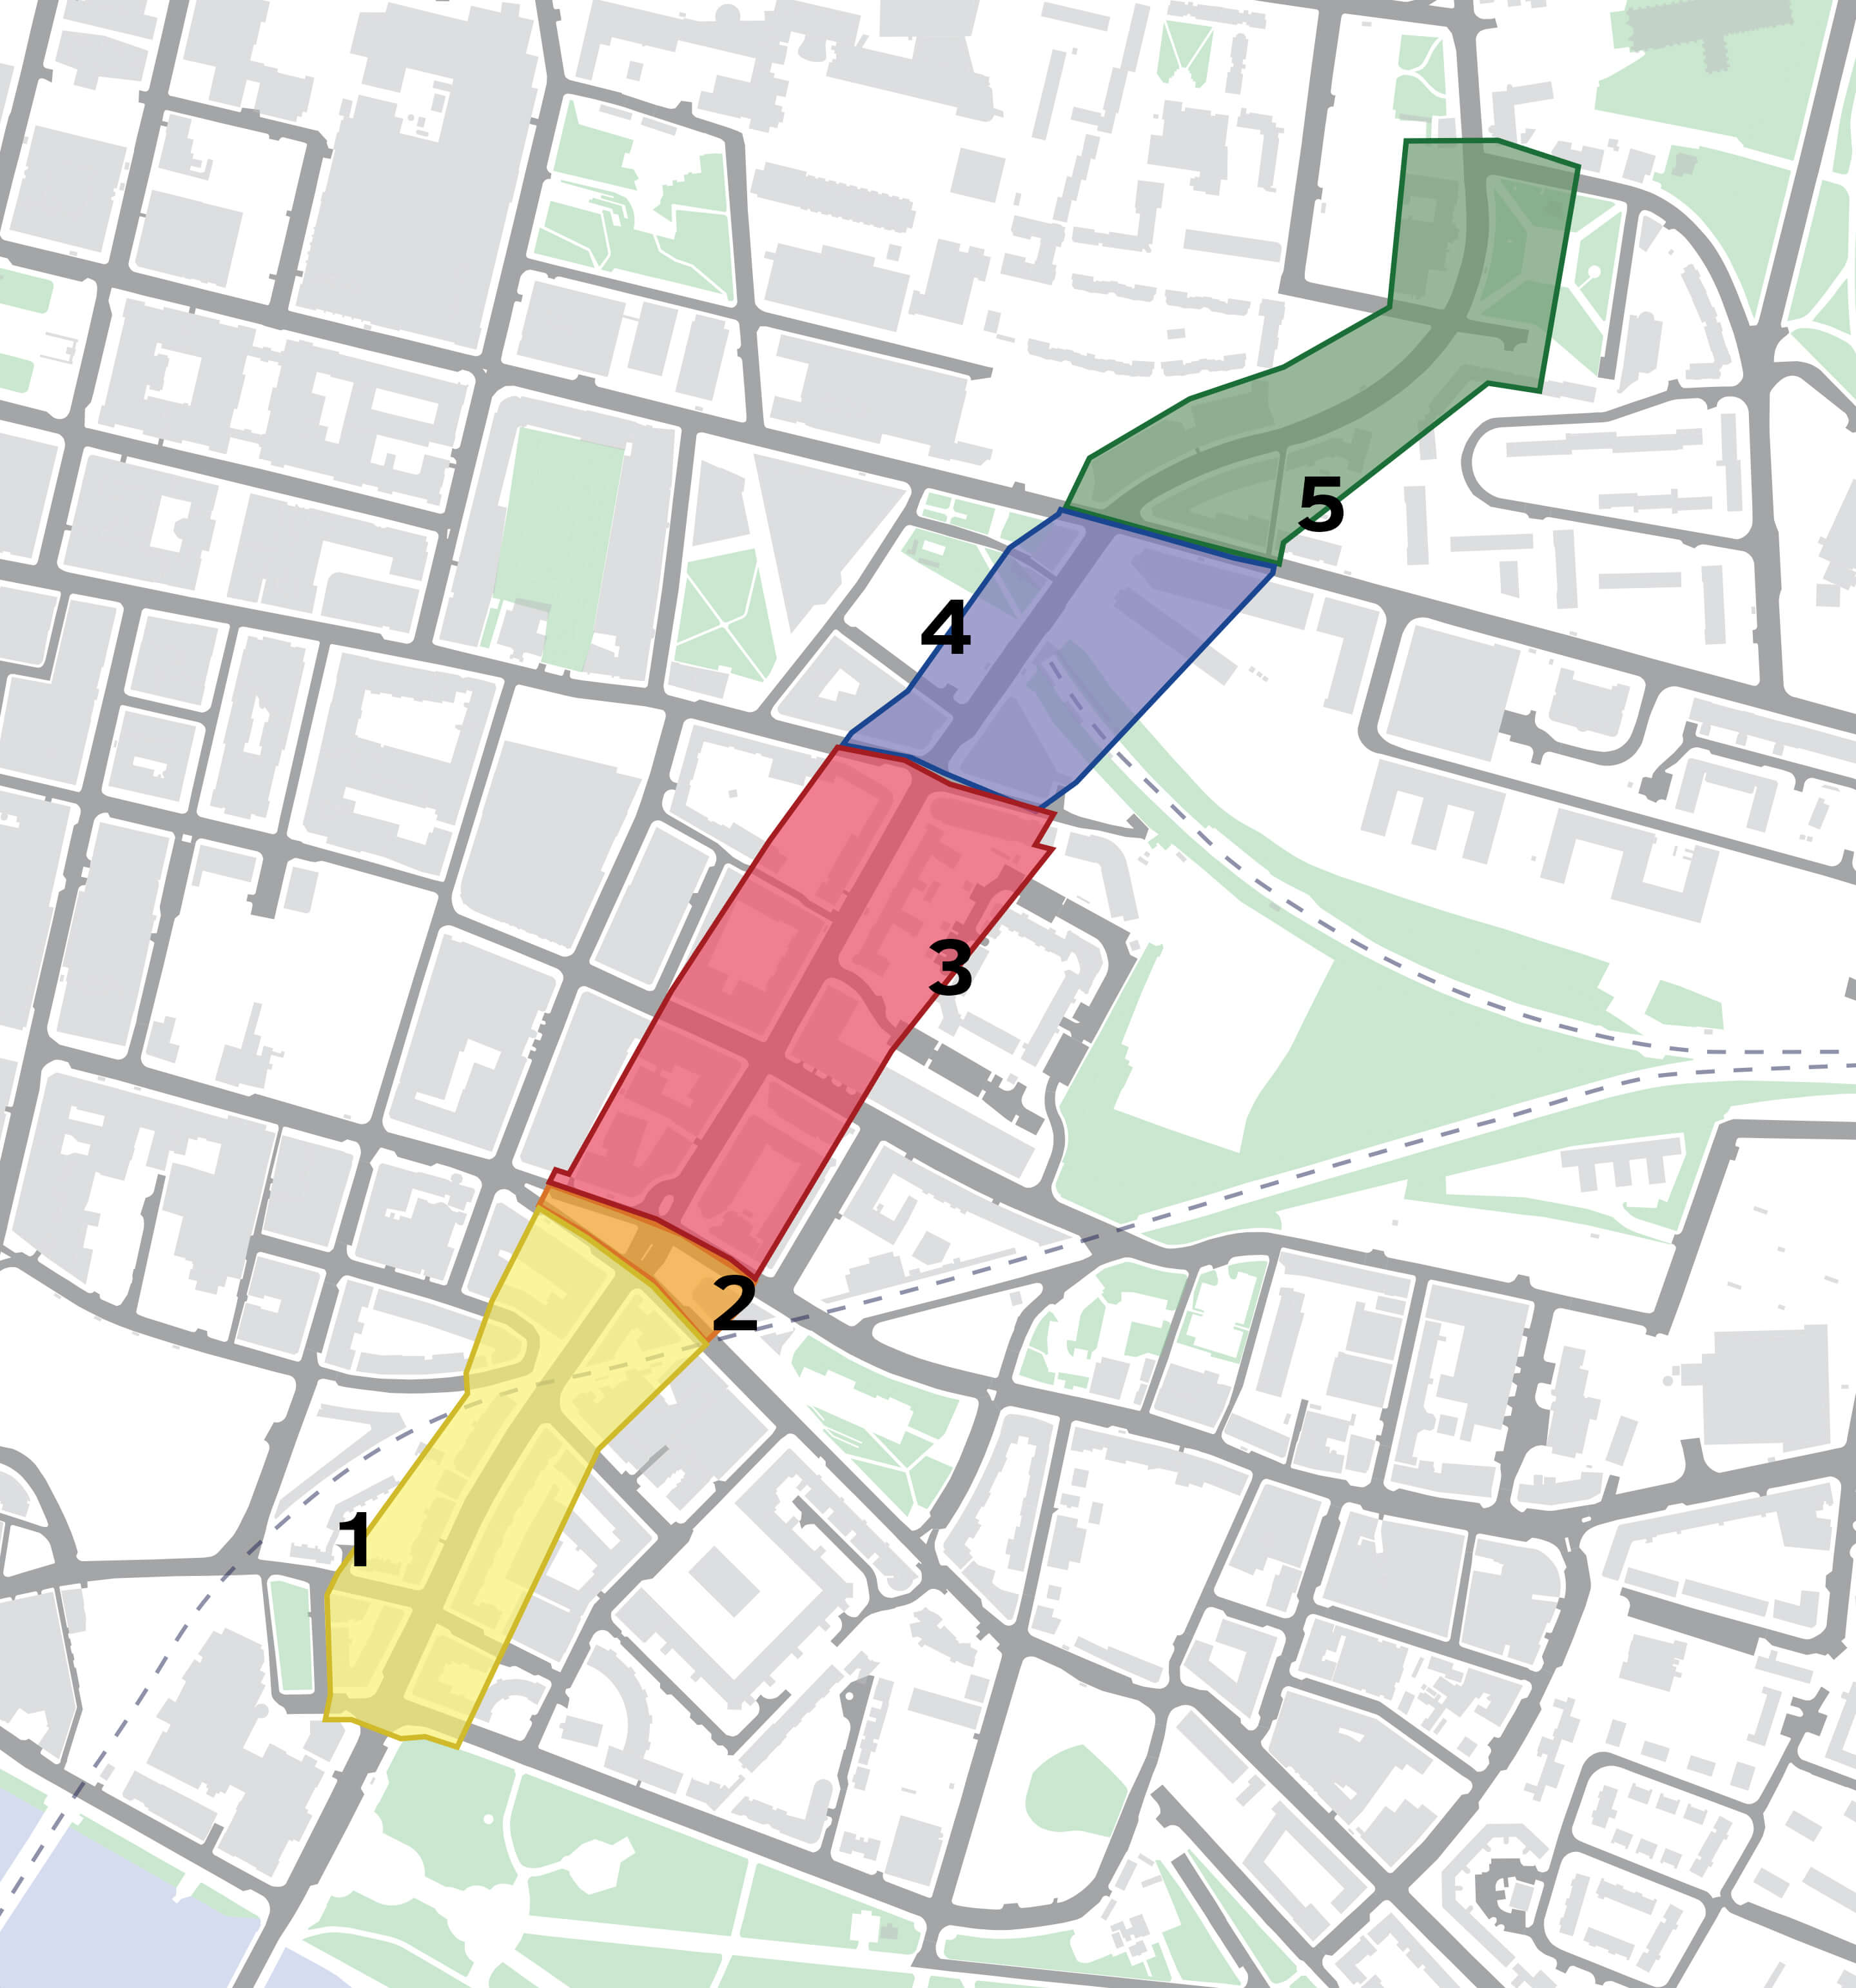 Map of Glasgow High Street, showing 5 key areas